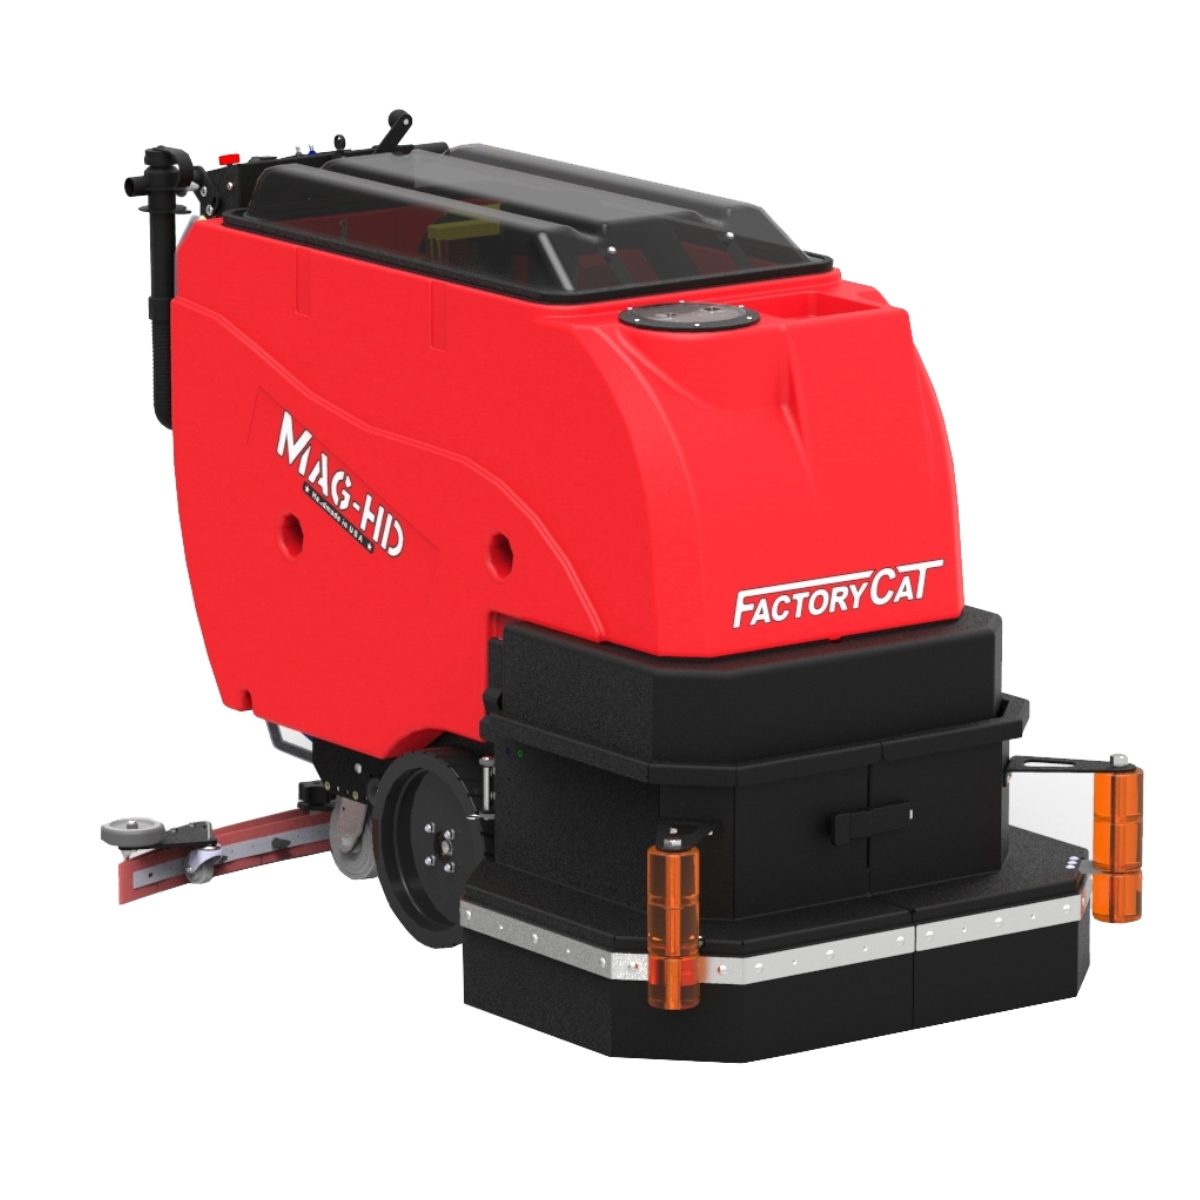 Cleaning large areas is what the Mag-HD floor scrubber is engineered and built to do. With its high-capacity solution and recovery tanks and battery pack options, the Mag-HD offers extended scrub times and covers a lot of square footage per hour.